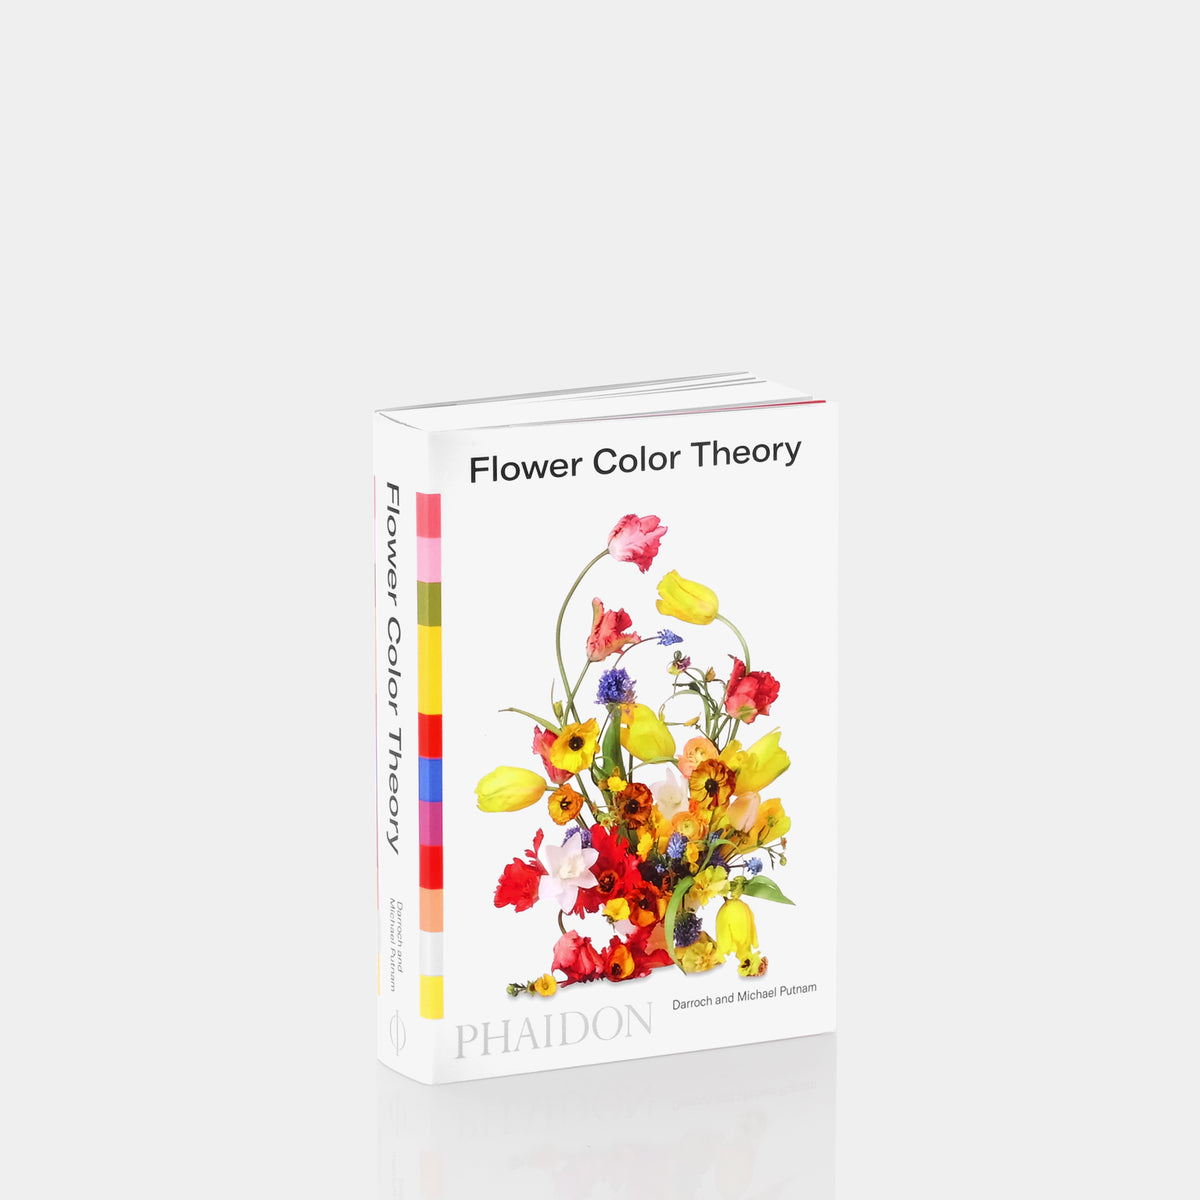 Flower Color Theory (Signed Edition) [Book]